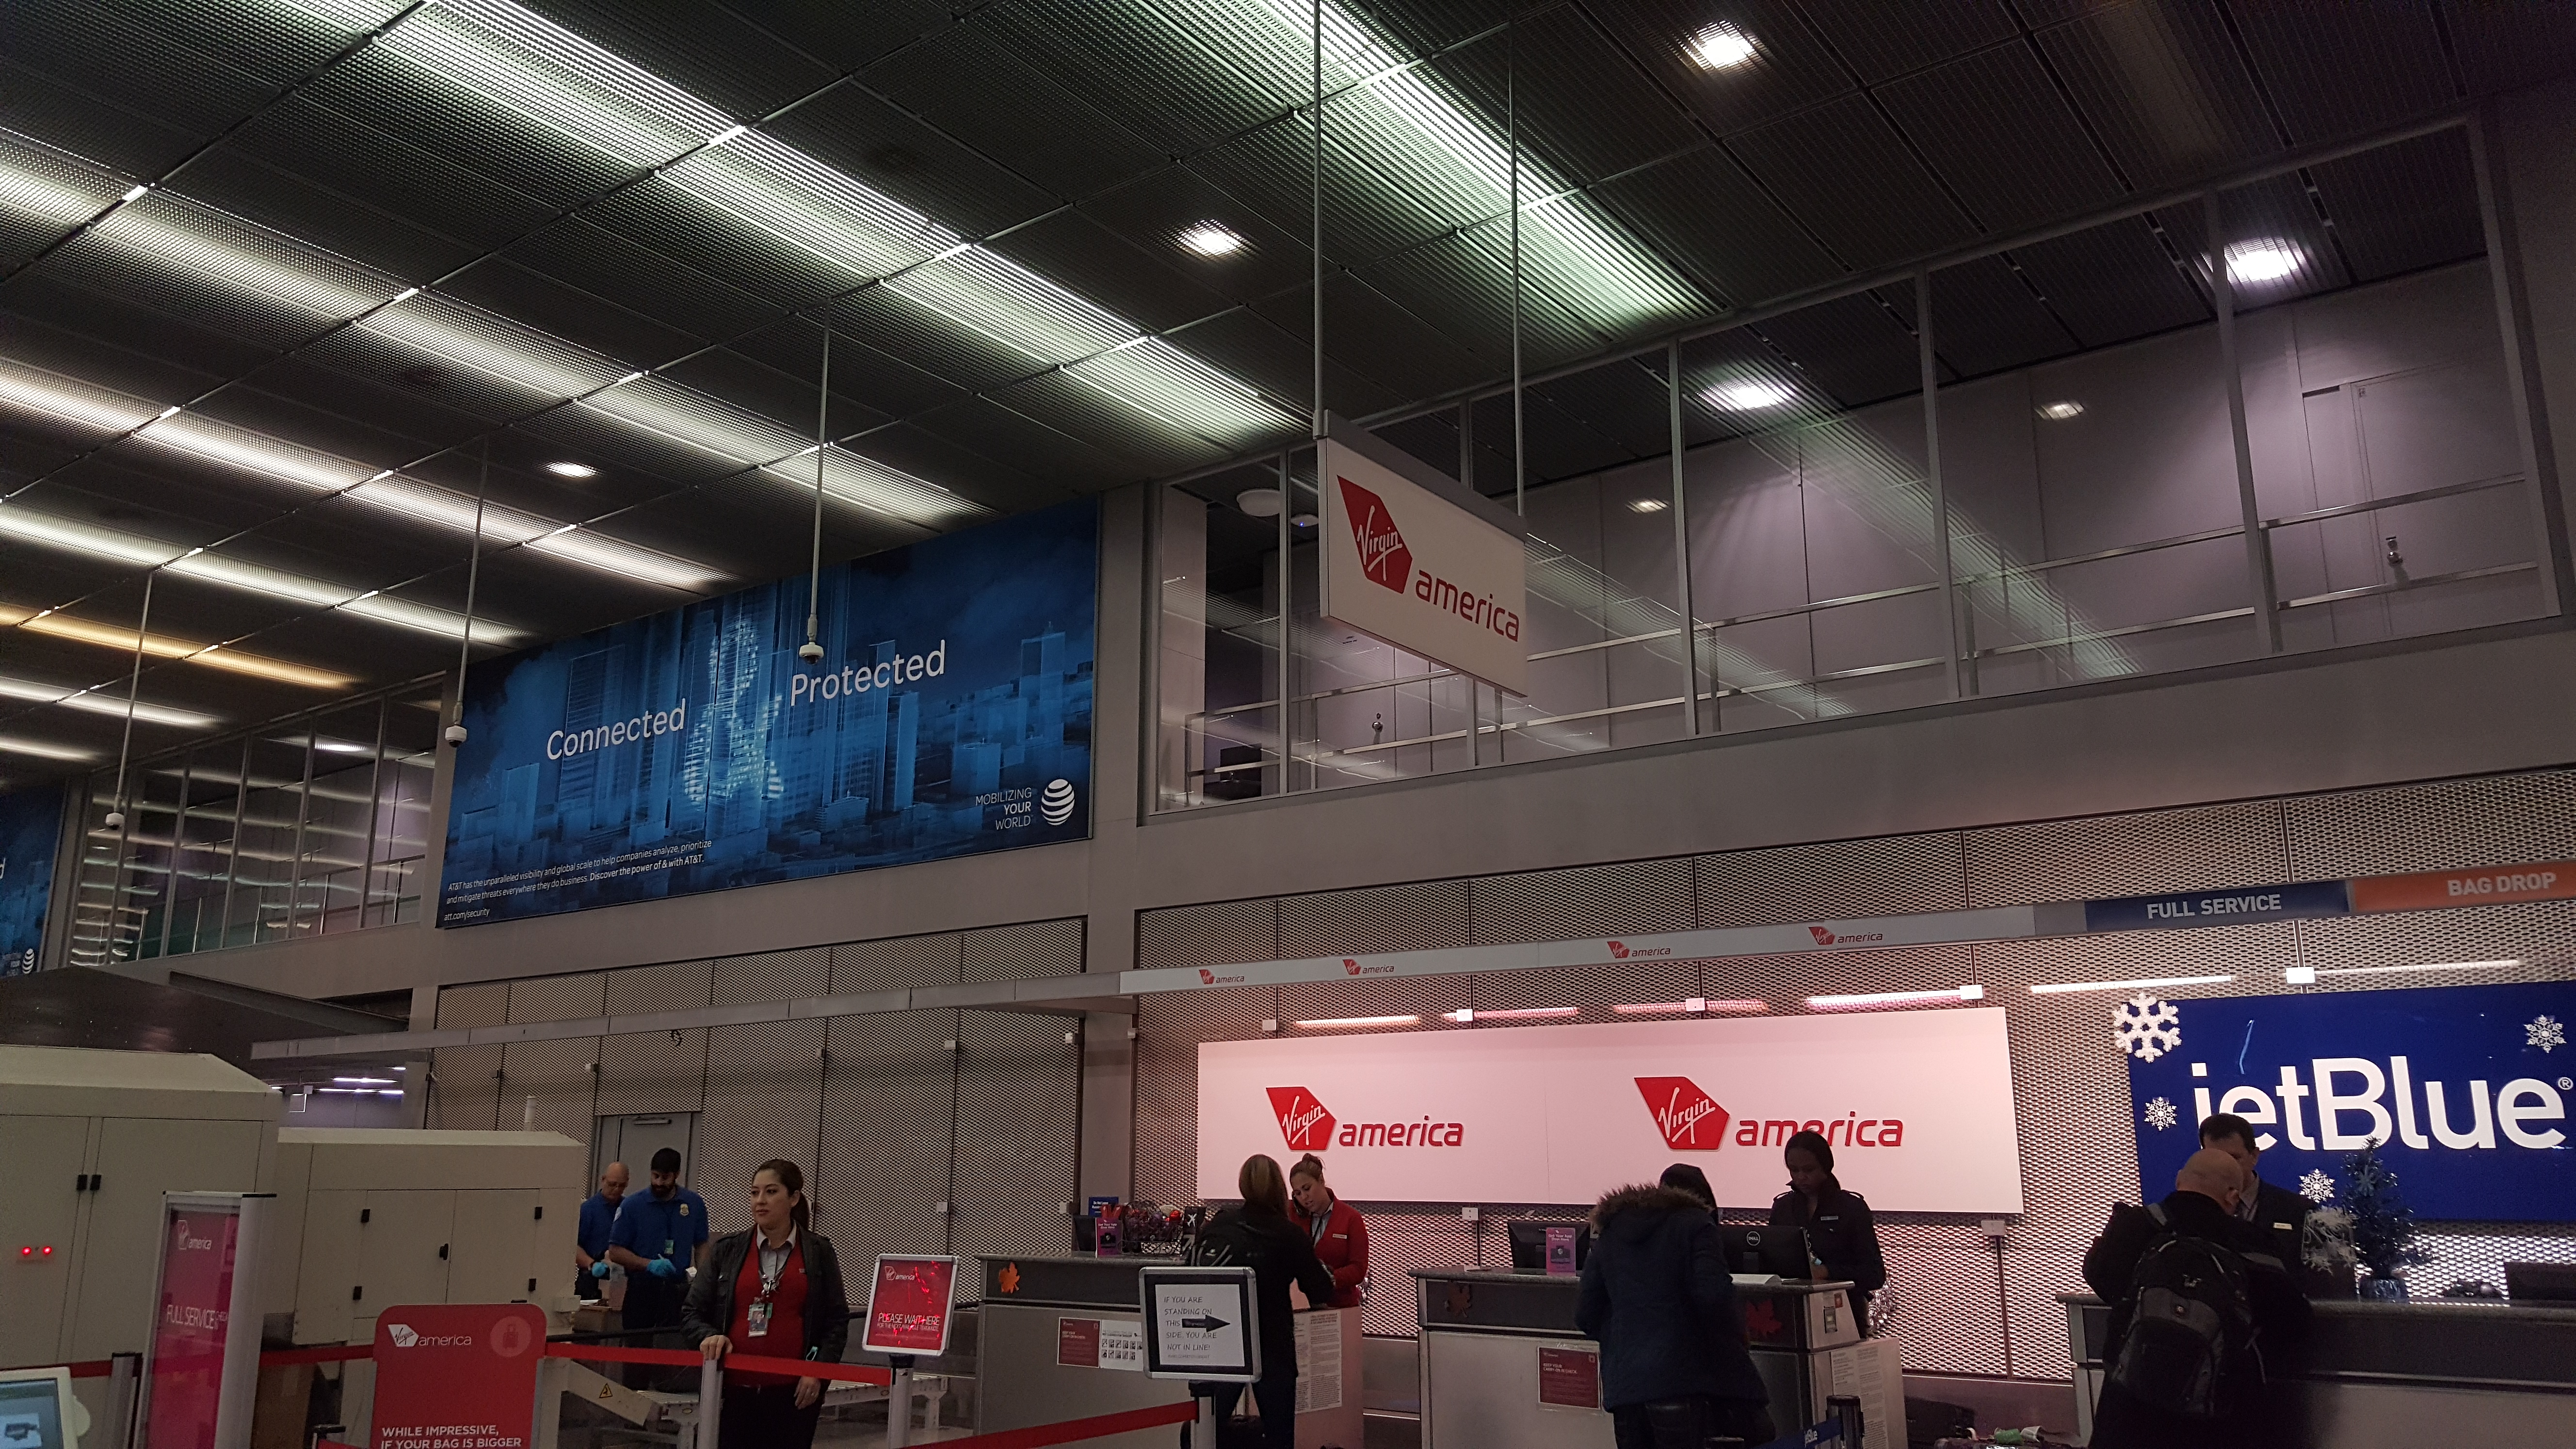 Virgin America First Class Check-In at ORD